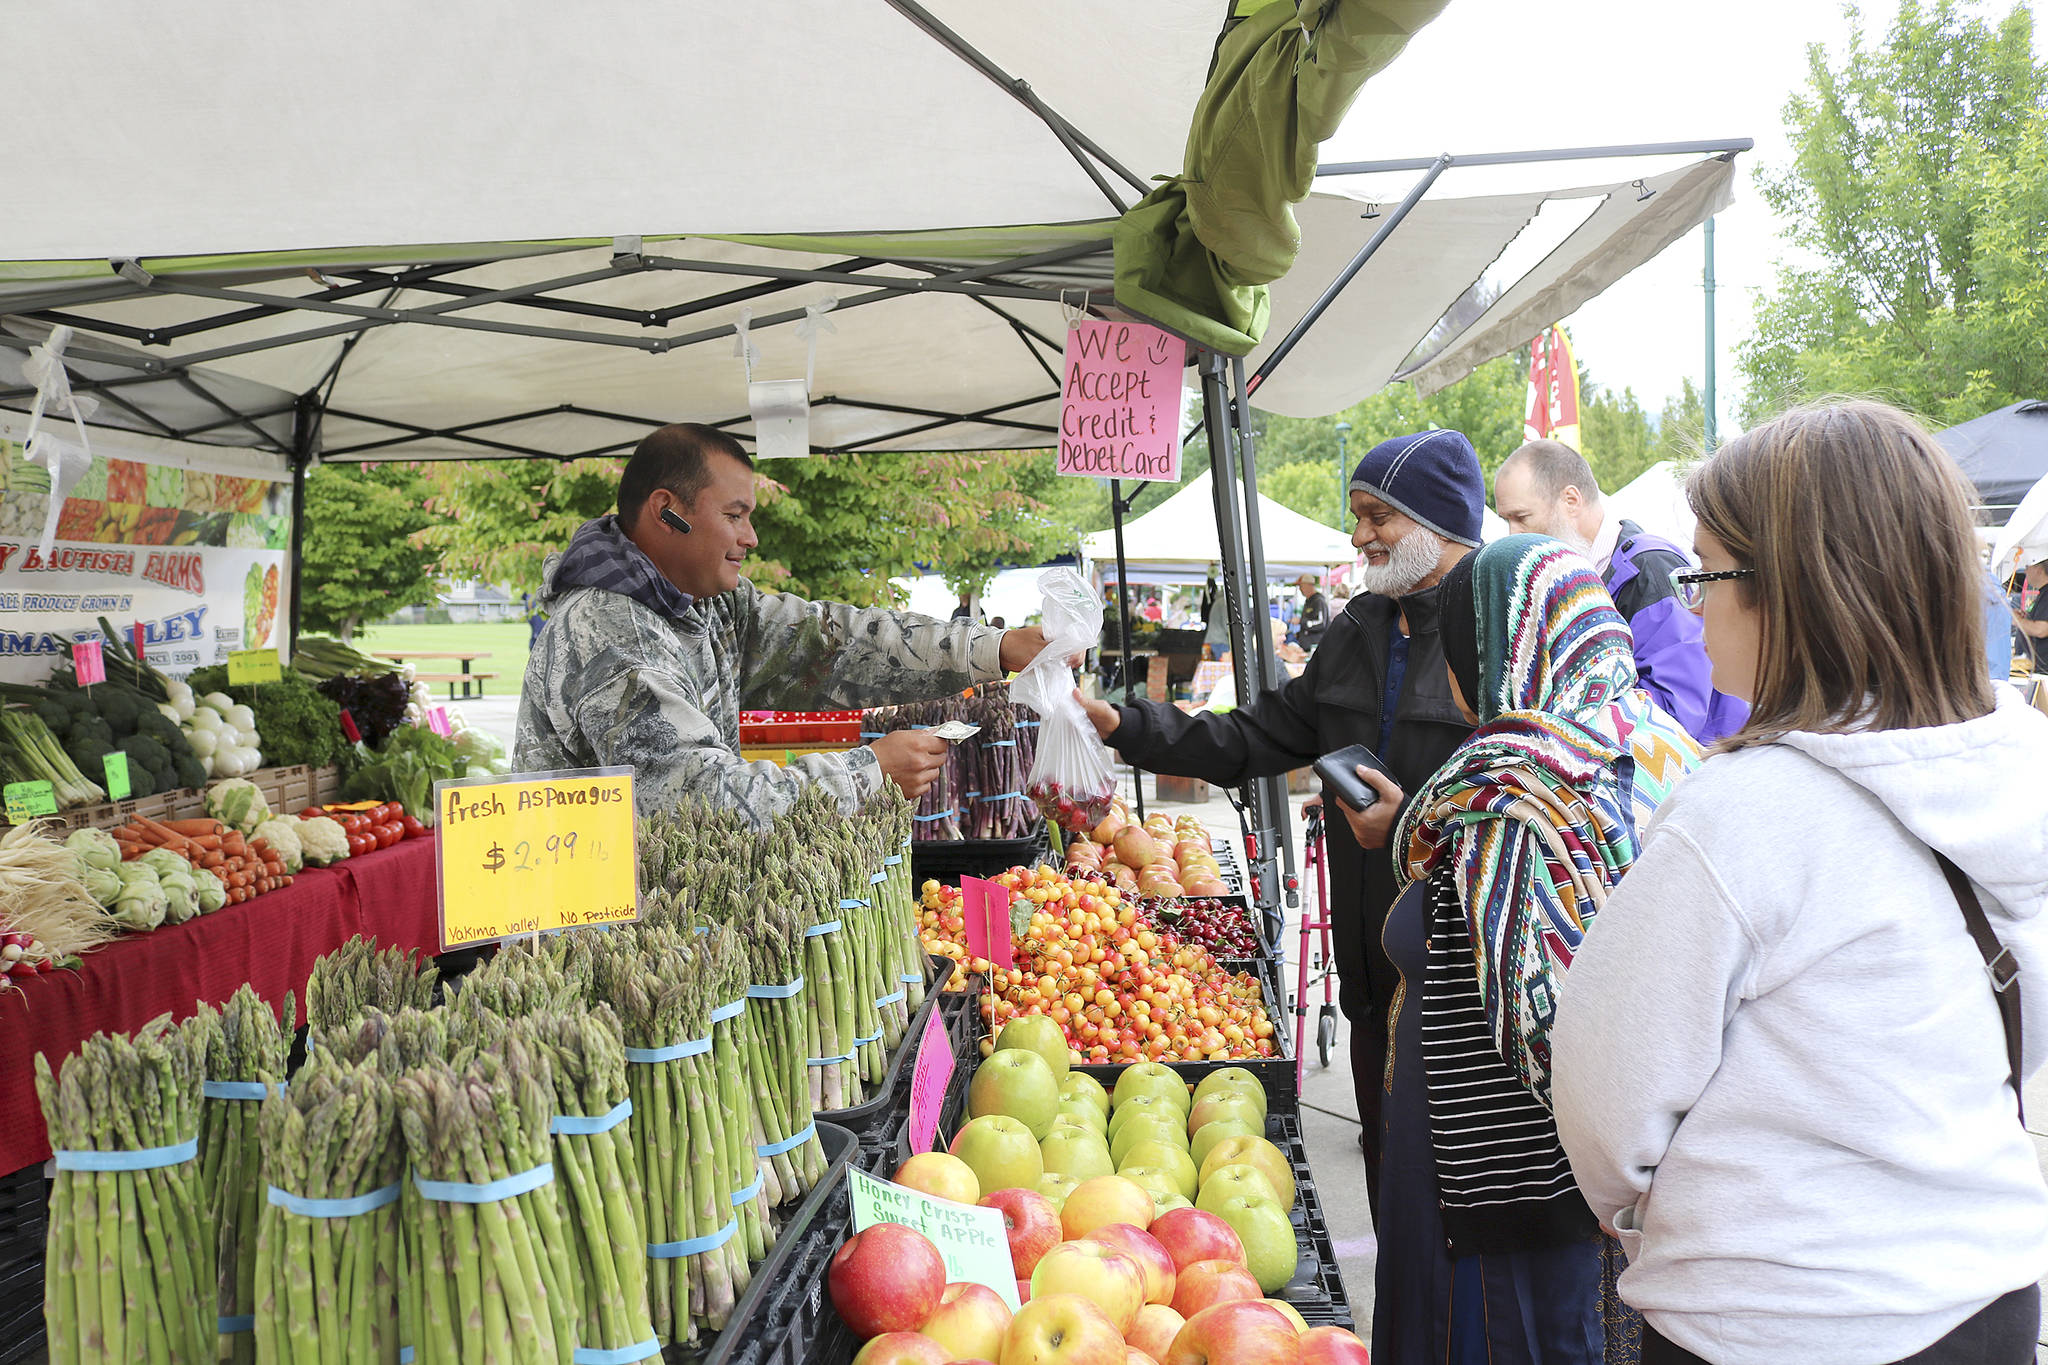 Customers buy vegetables at the North Bend Farmers Market opening day in 2019. File photo